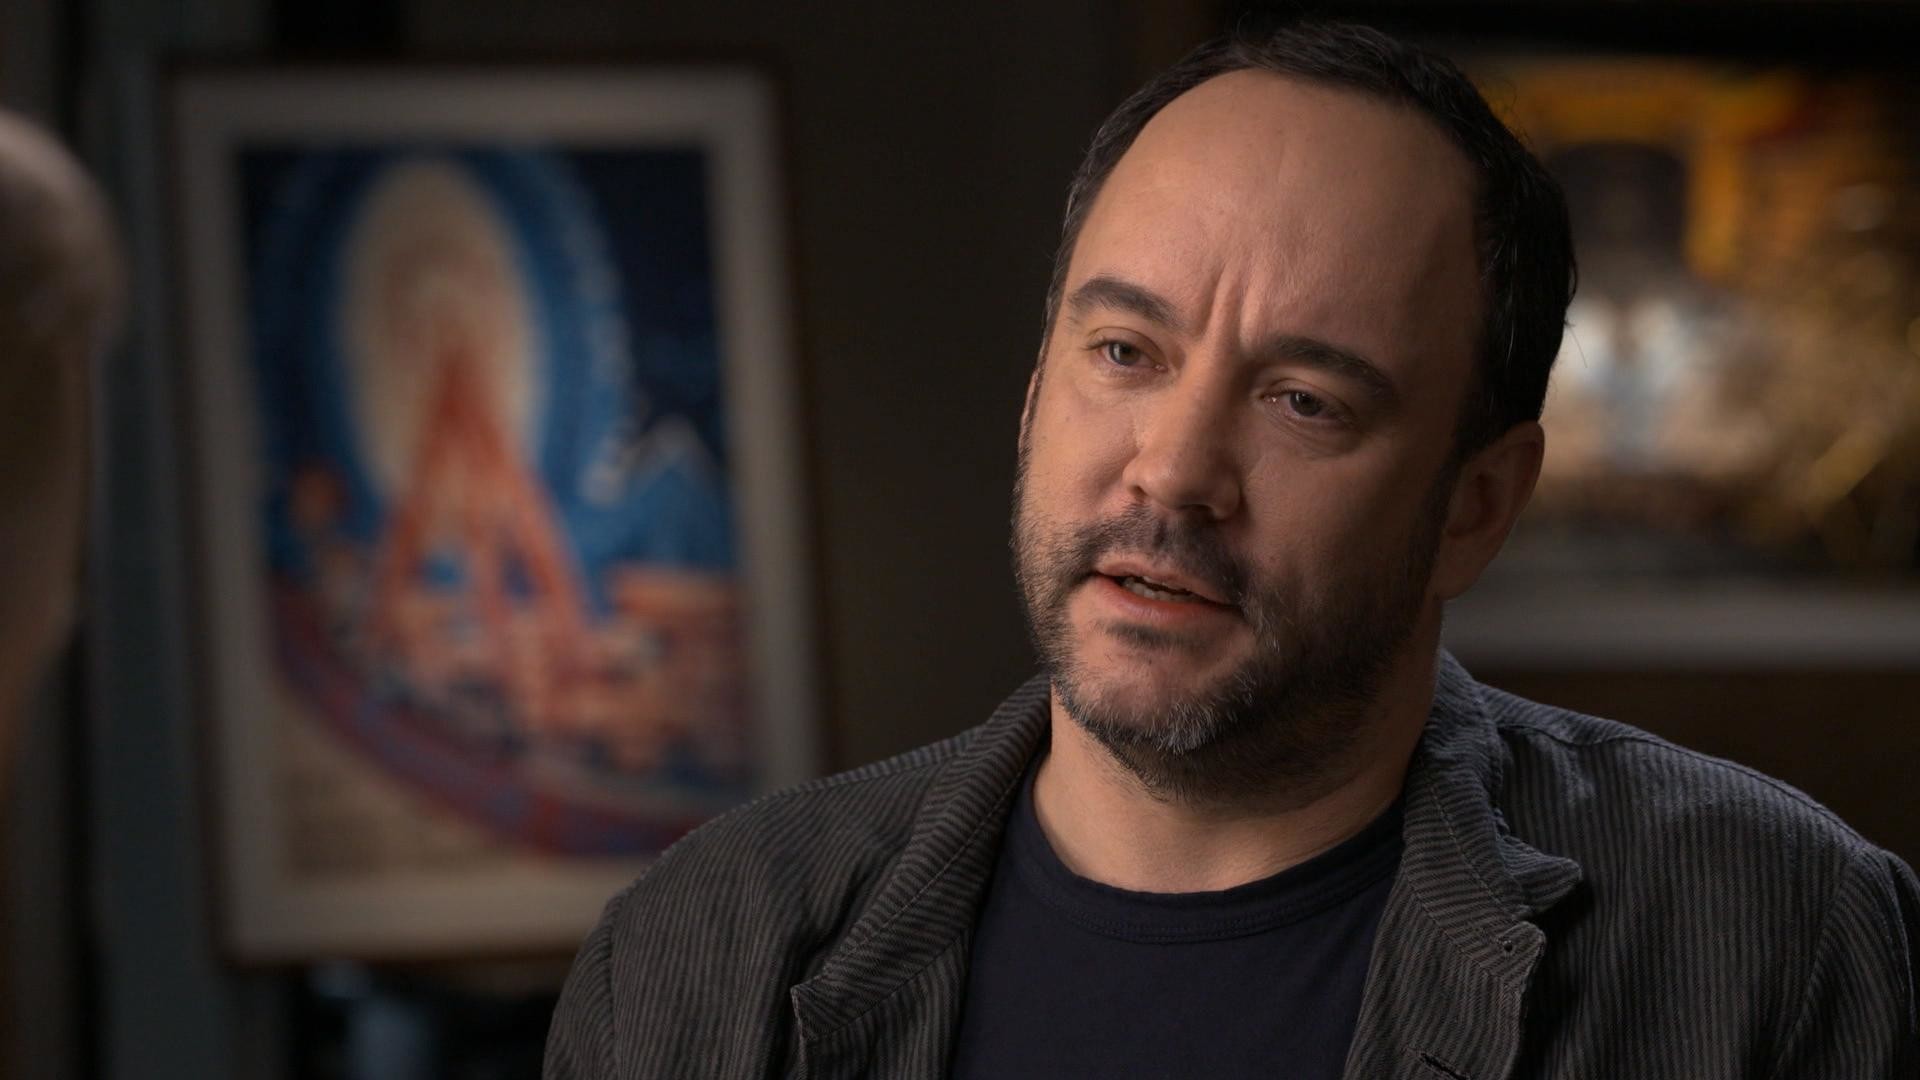 1920x1080 Watch CBS This Morning: Dave Matthews gives back to Charlottesville - Full  show on CBS All Access